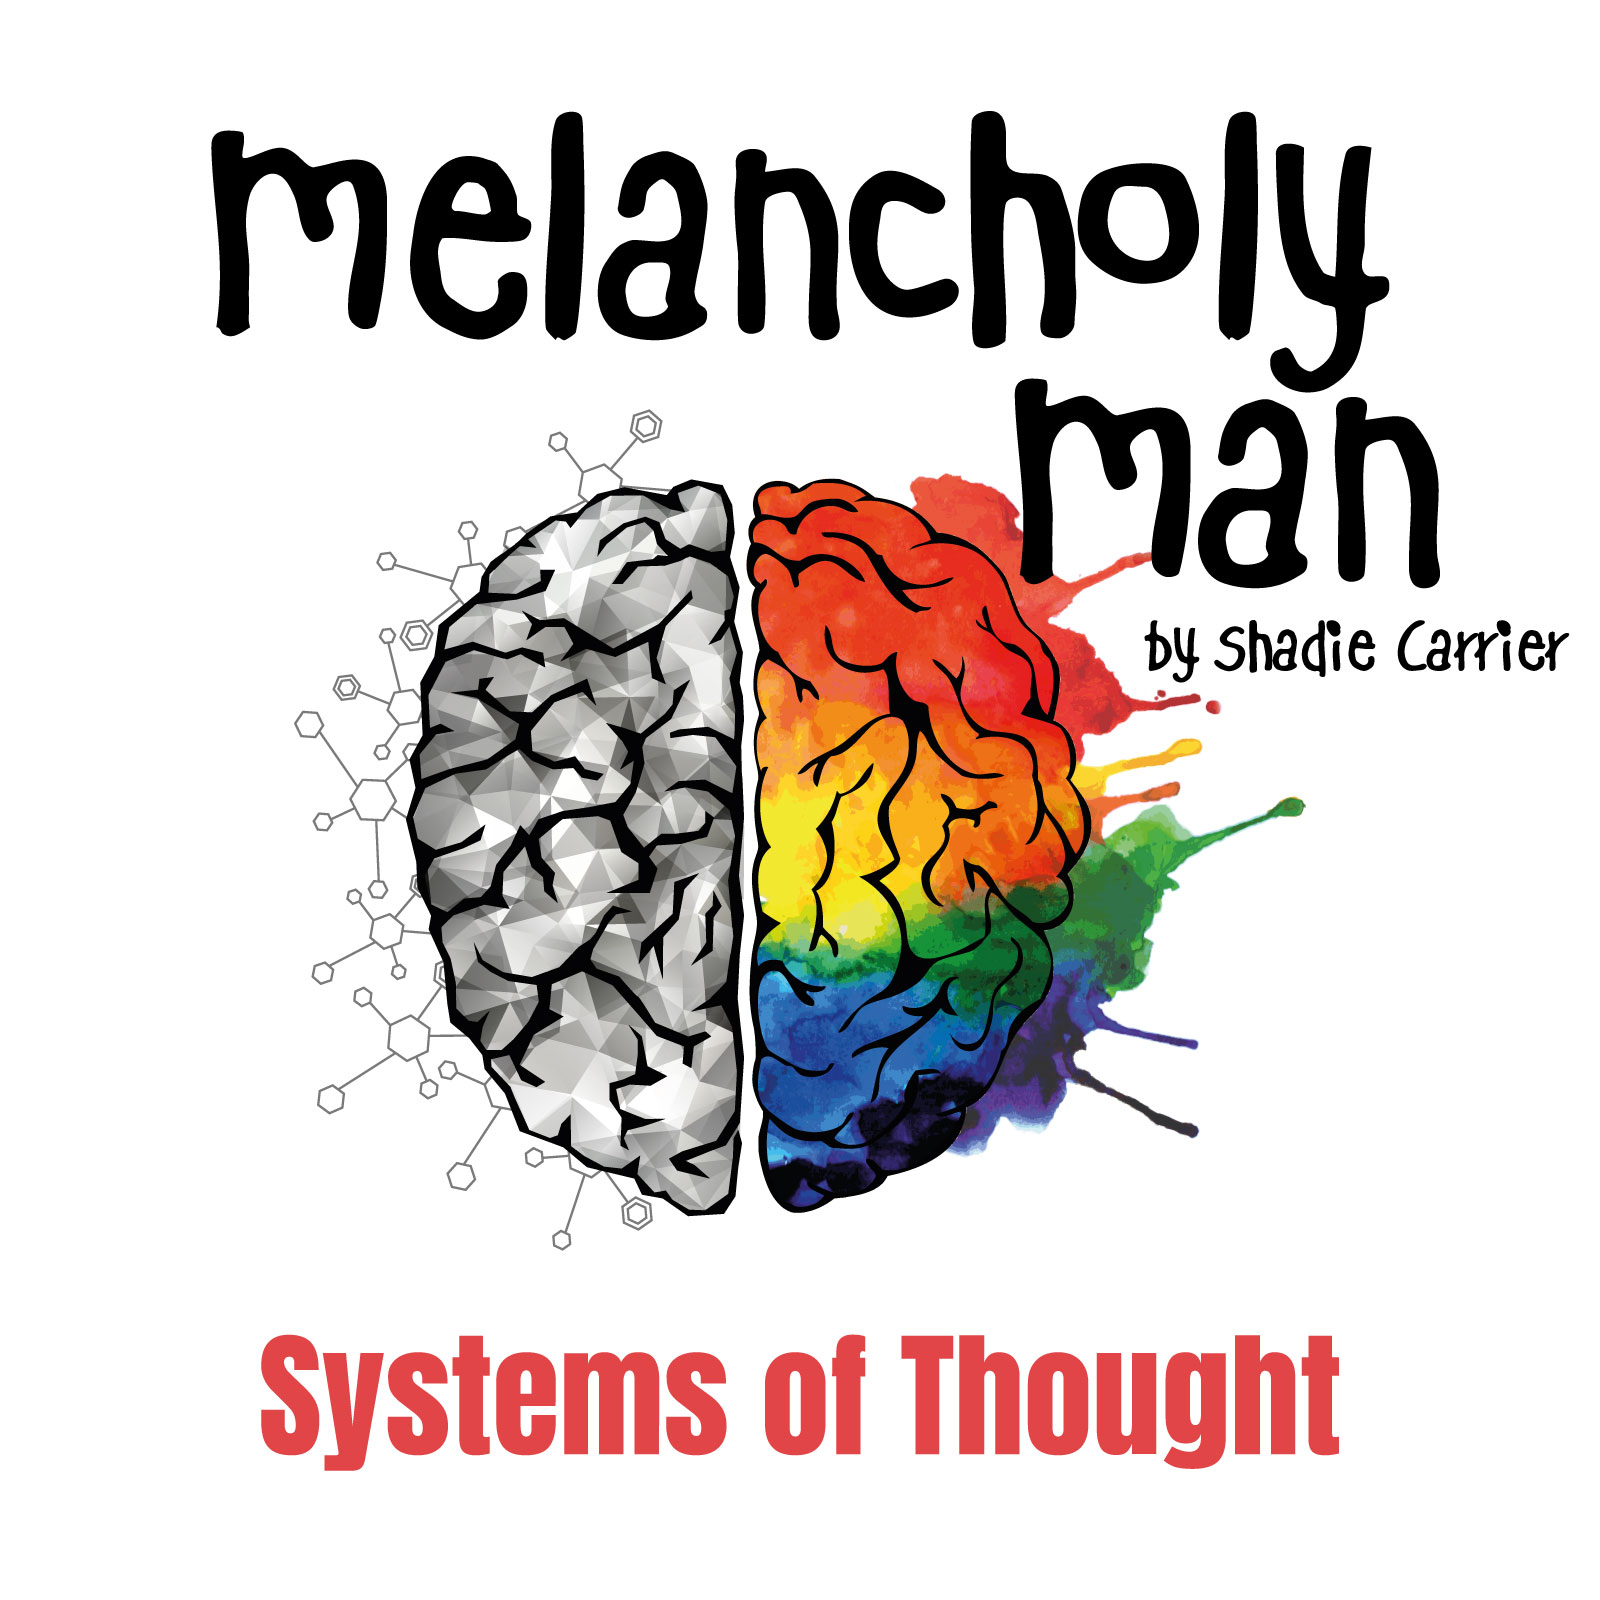 Melancholy Man #1 - Systems of Thought